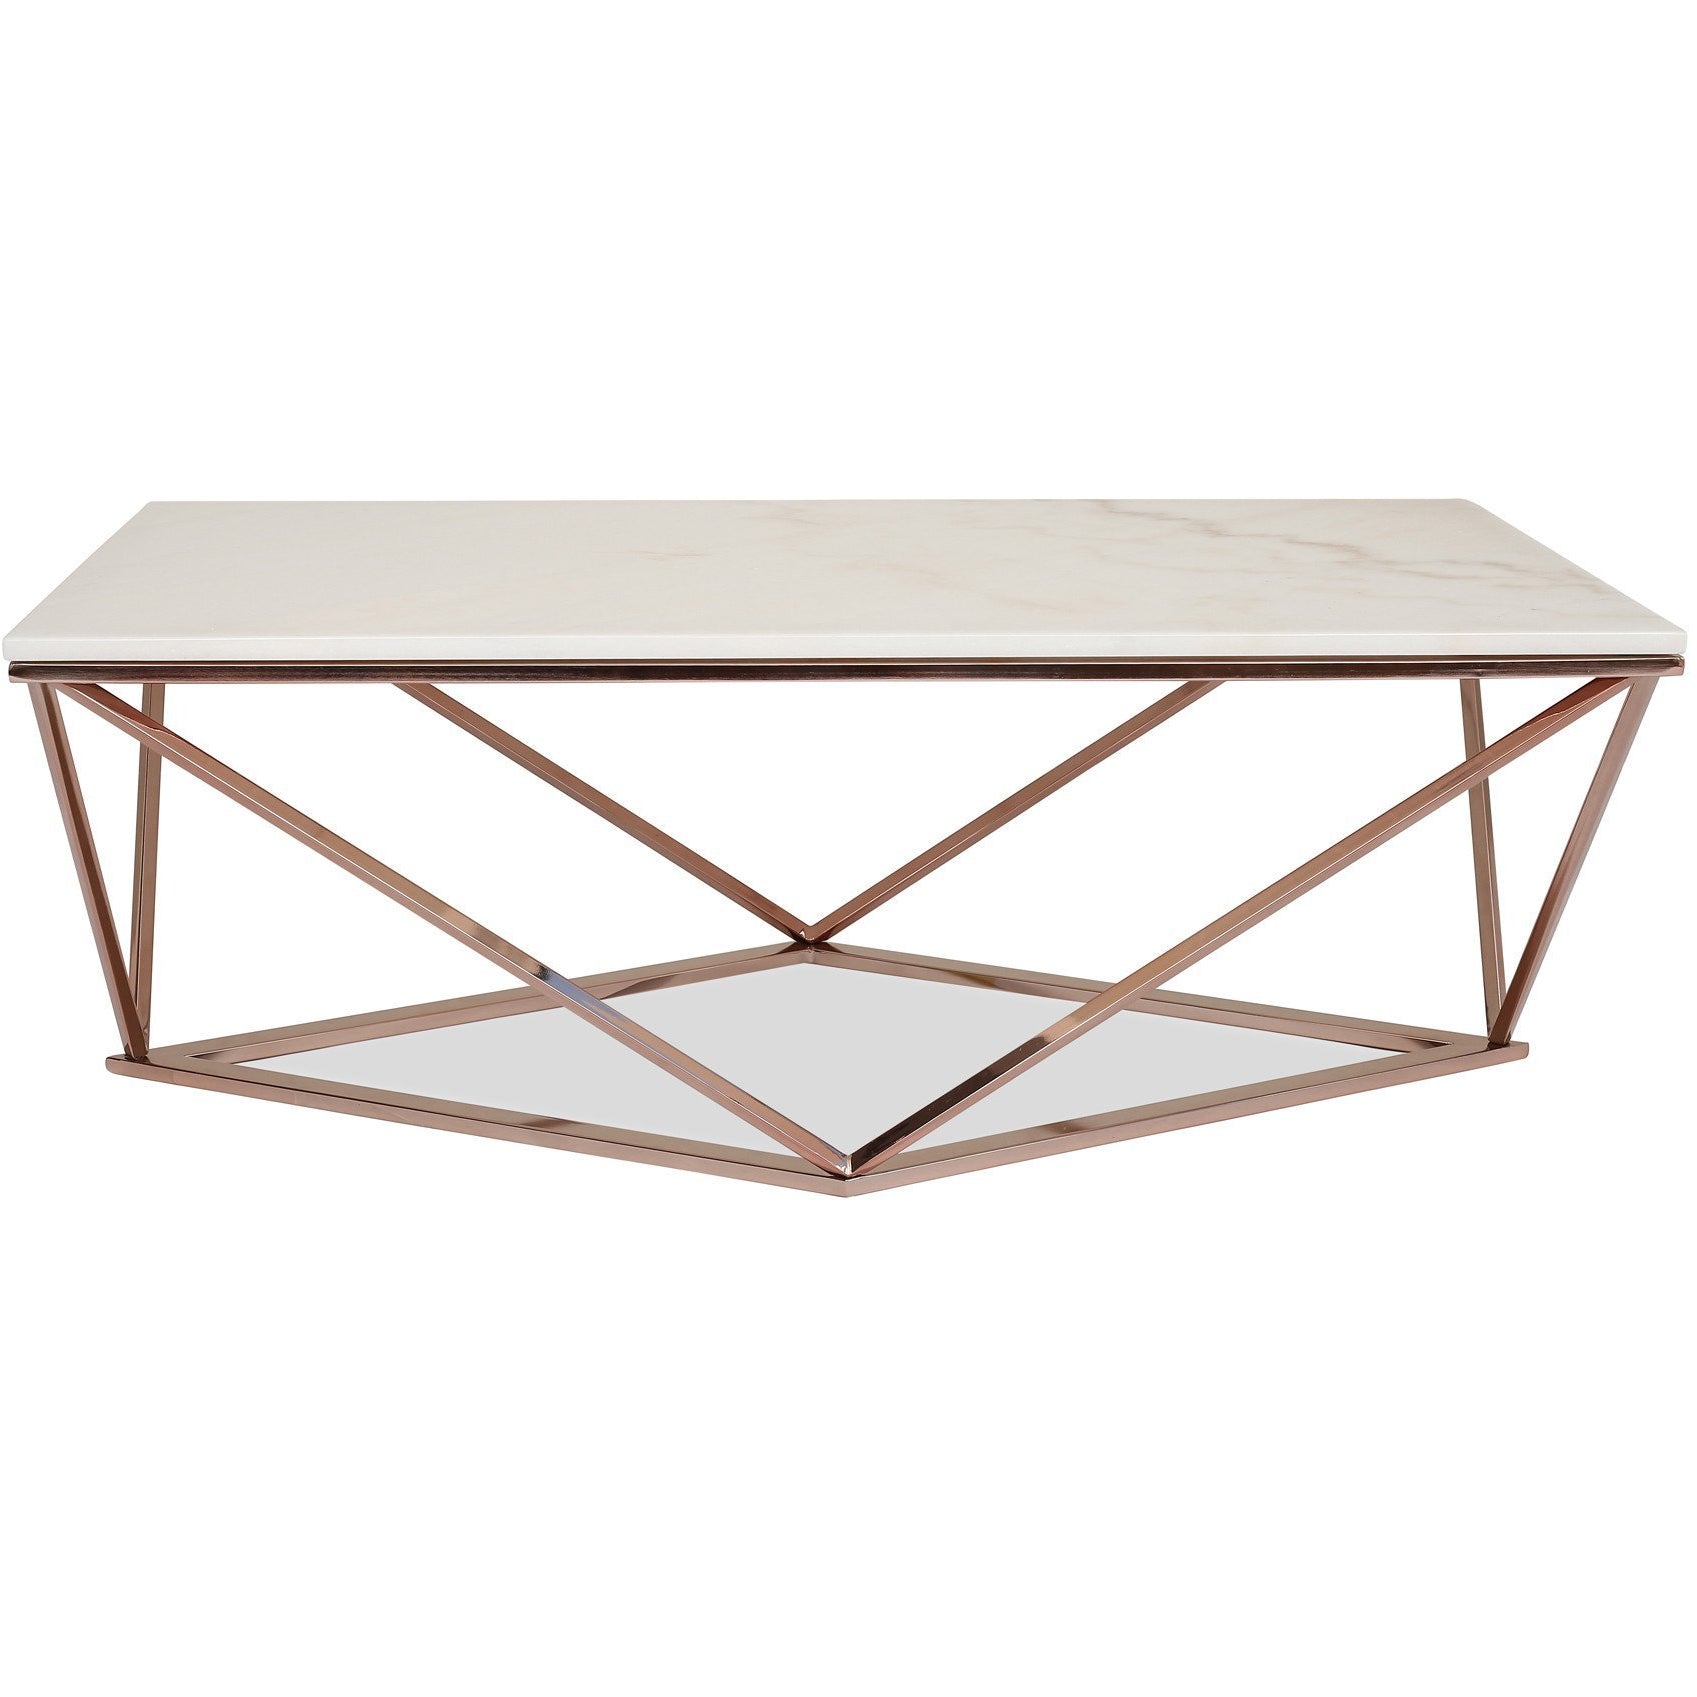 Edloe Finch Aria Rose Gold Coffee Table with White Marble Top